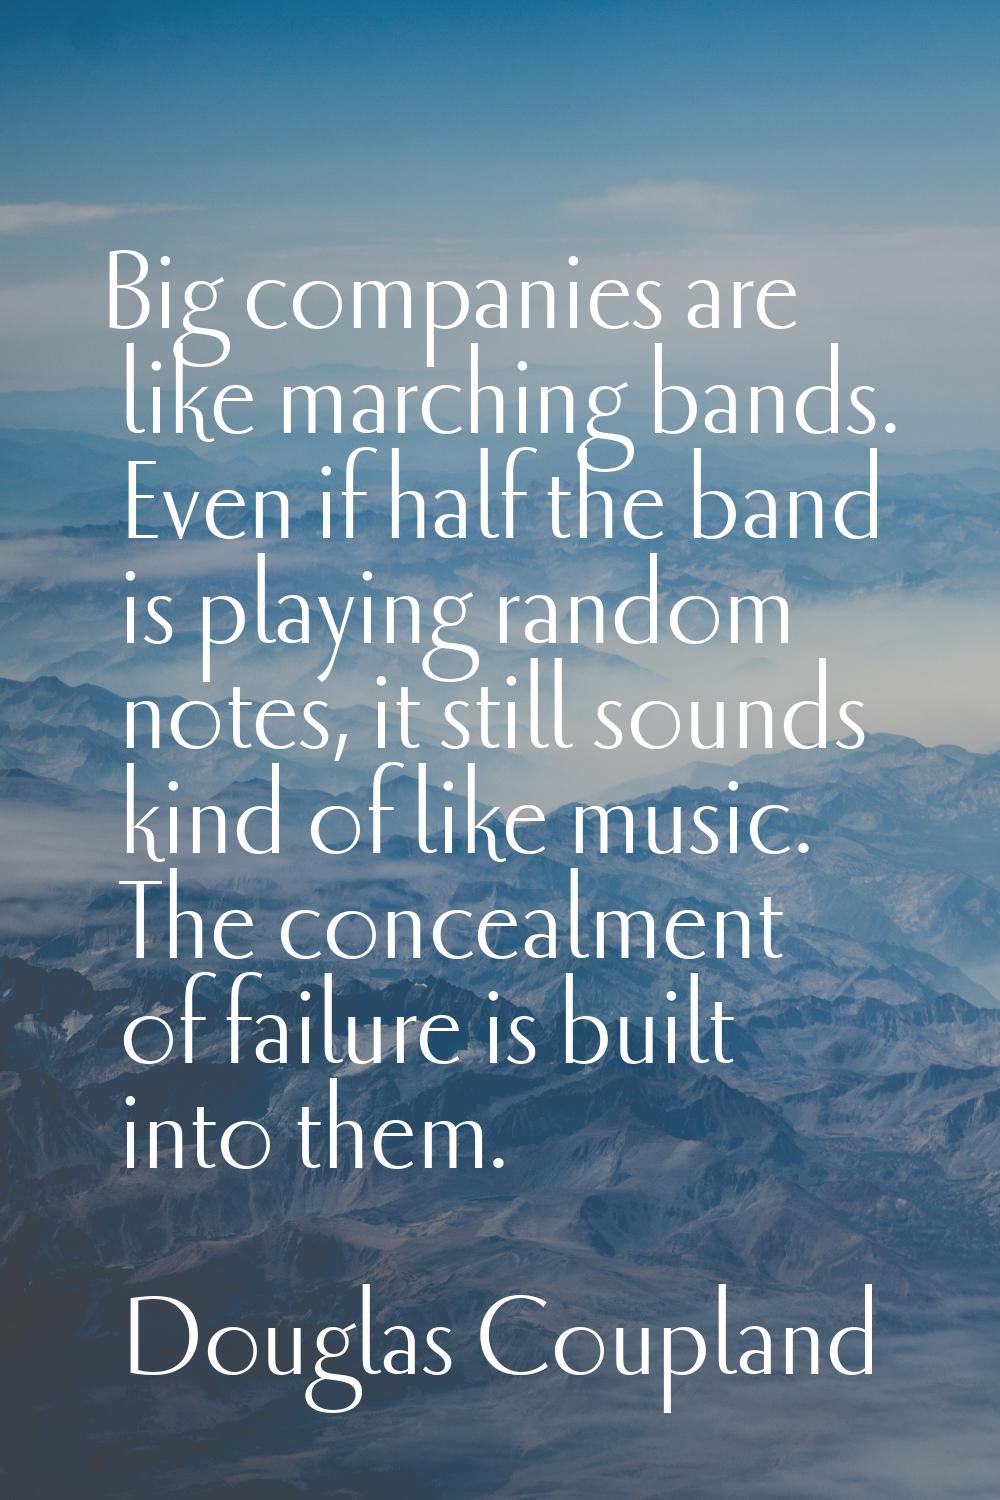 Big companies are like marching bands. Even if half the band is playing random notes, it still soun